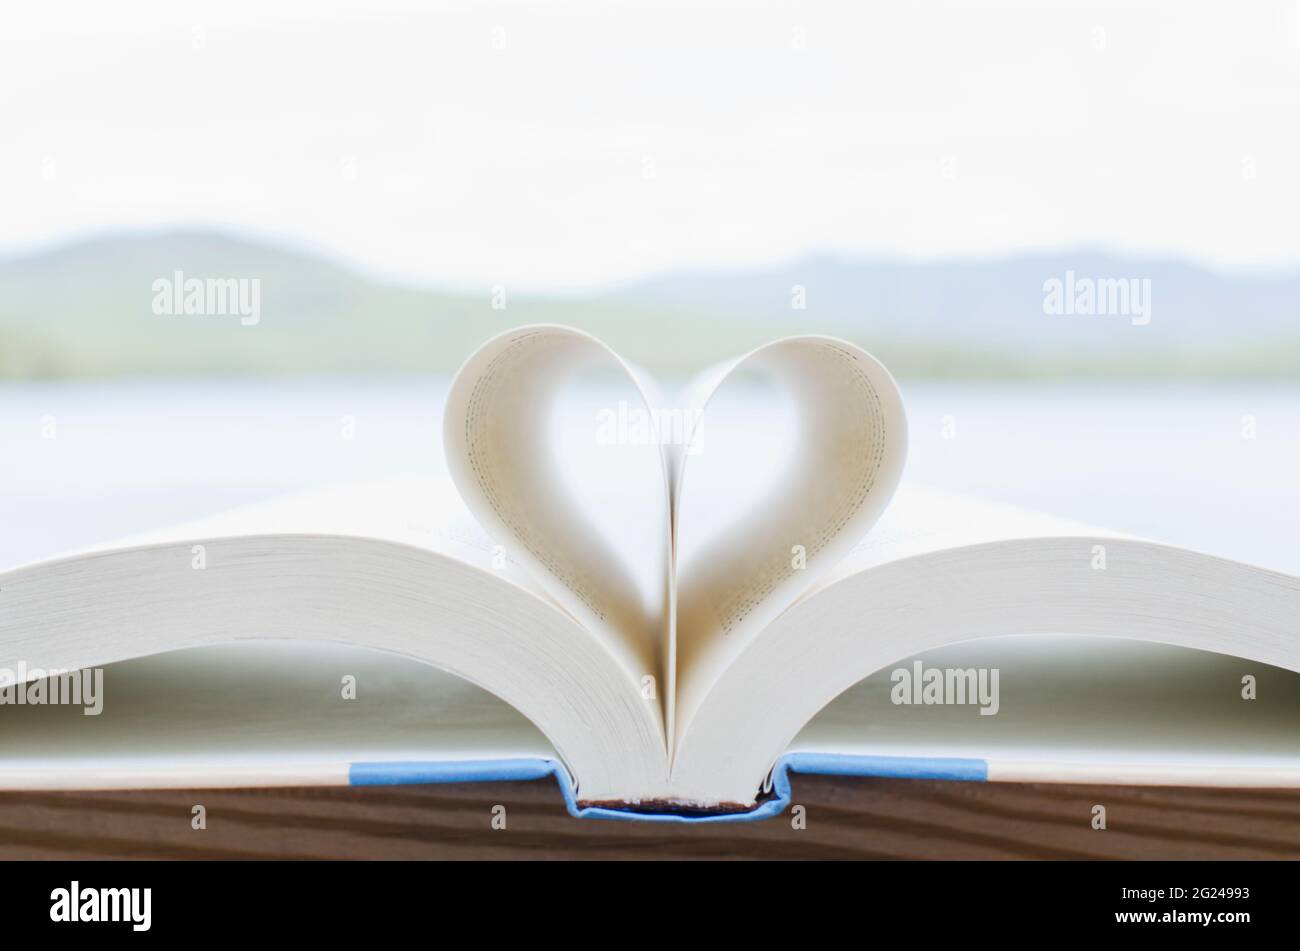 Book pages folded in heart shape Stock Photo